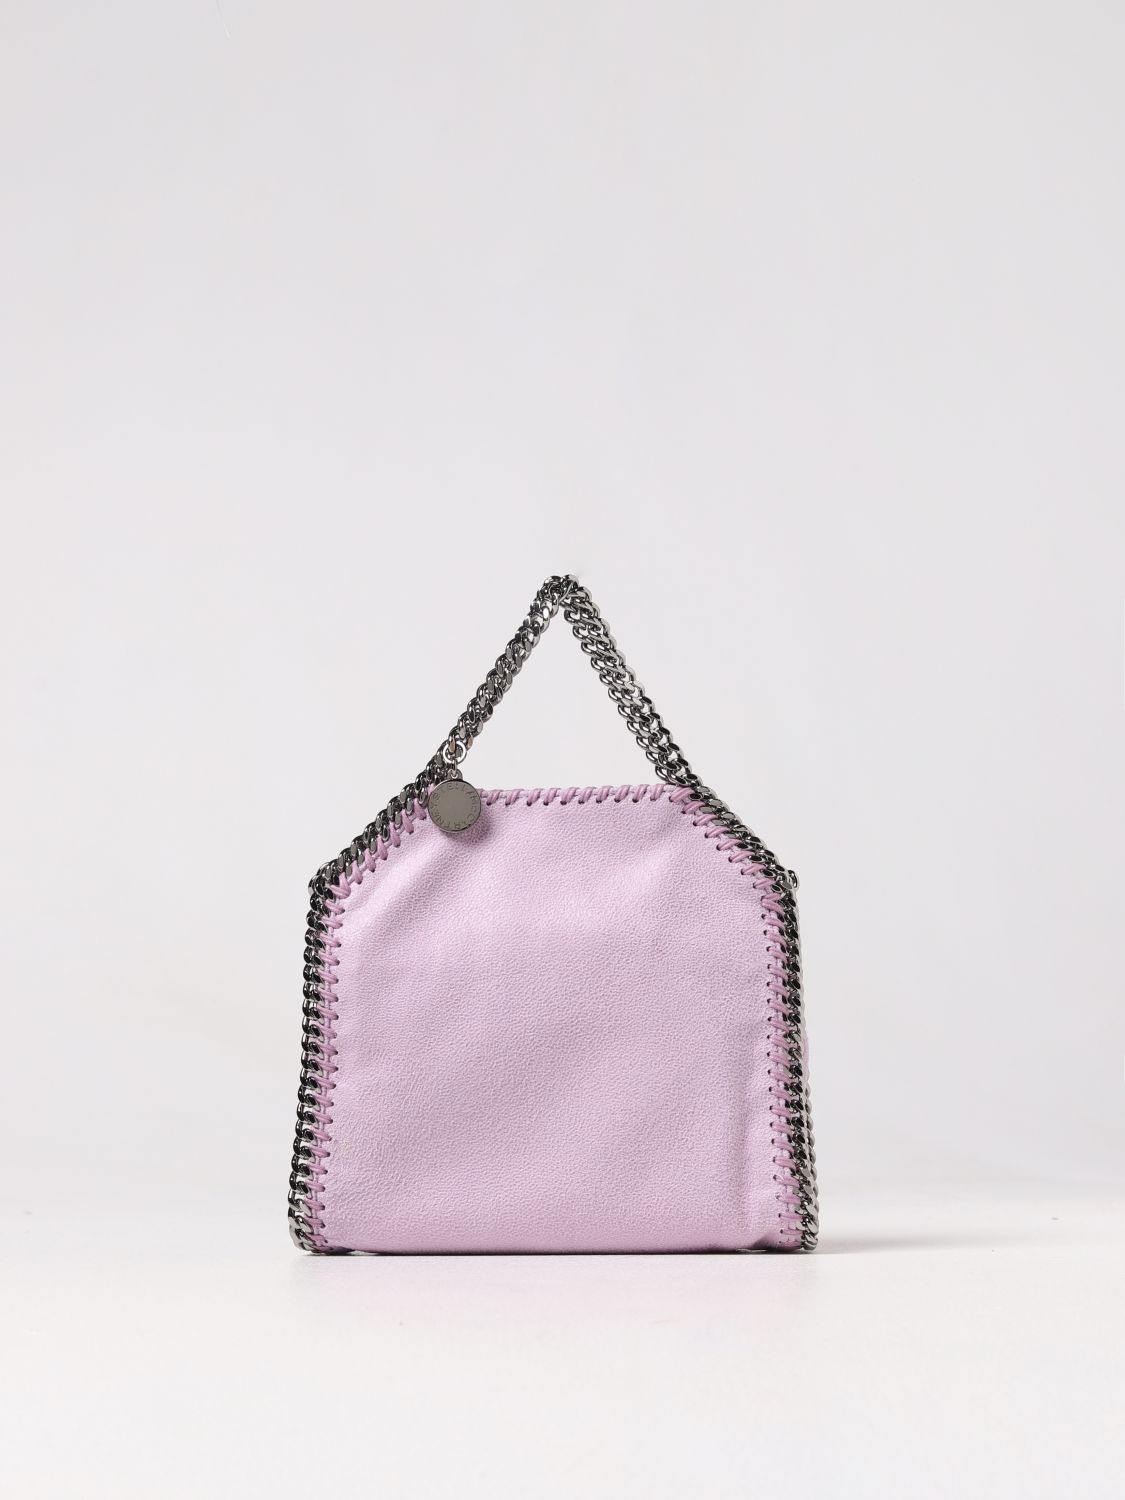 STELLA MCCARTNEY: bag in synthetic leather - Pink